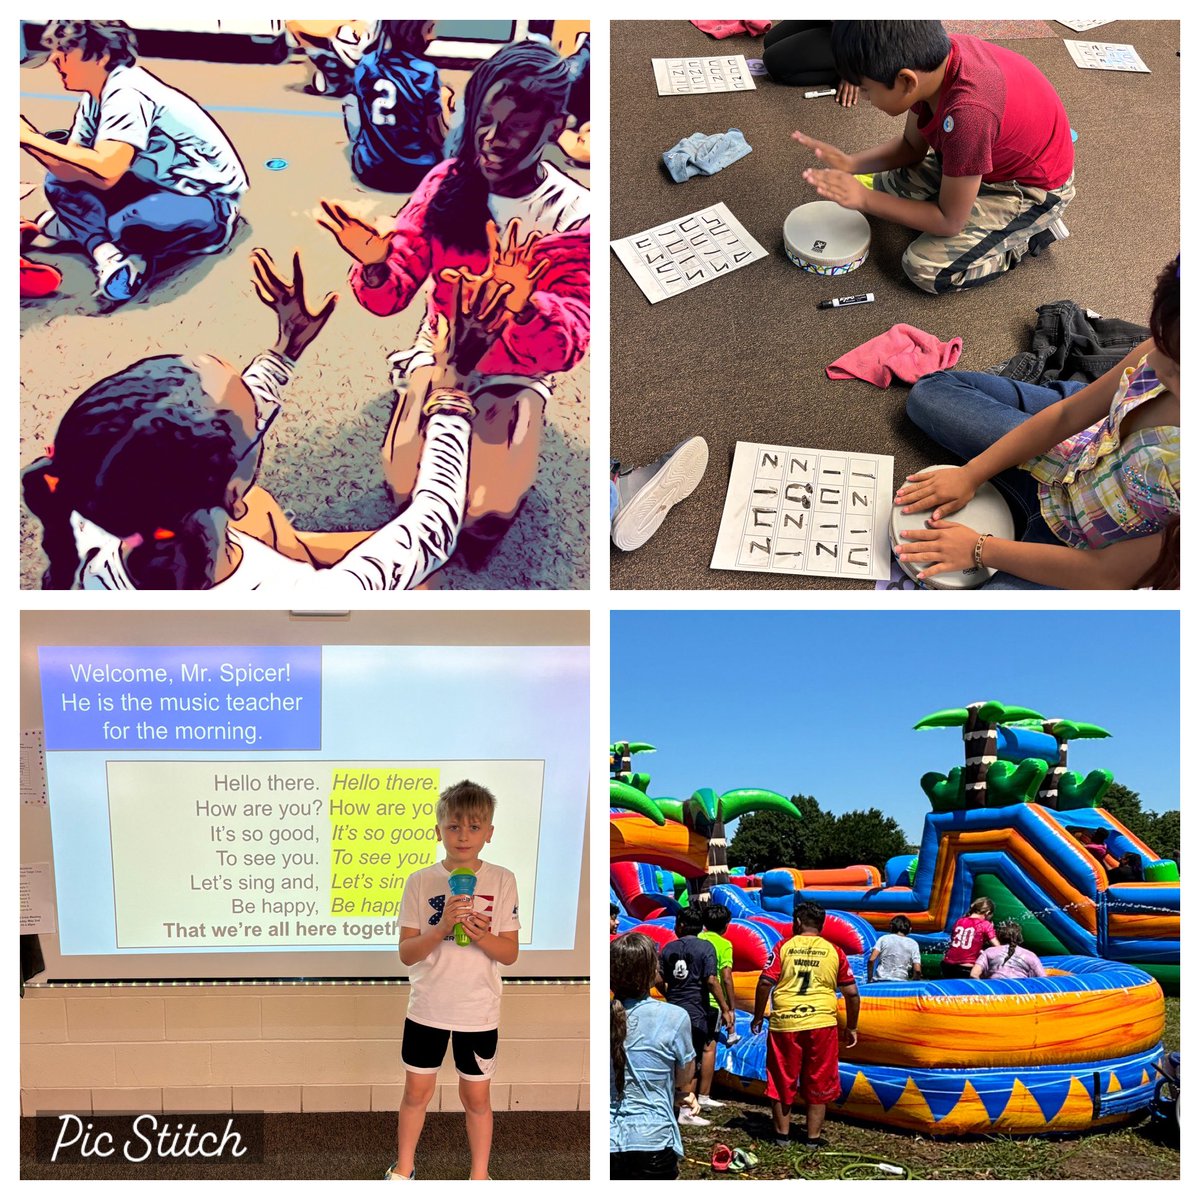 Week 35.B Still learning! 1. Hand clapping games. 2. Rhythm composition in 1st grade. 3. Music Teacher for the morning ⭐️ 4. Work hard, play hard - Field Day! Thank you, @nheptafalcons👏🏻 @nherisd #RISDWeAreOne